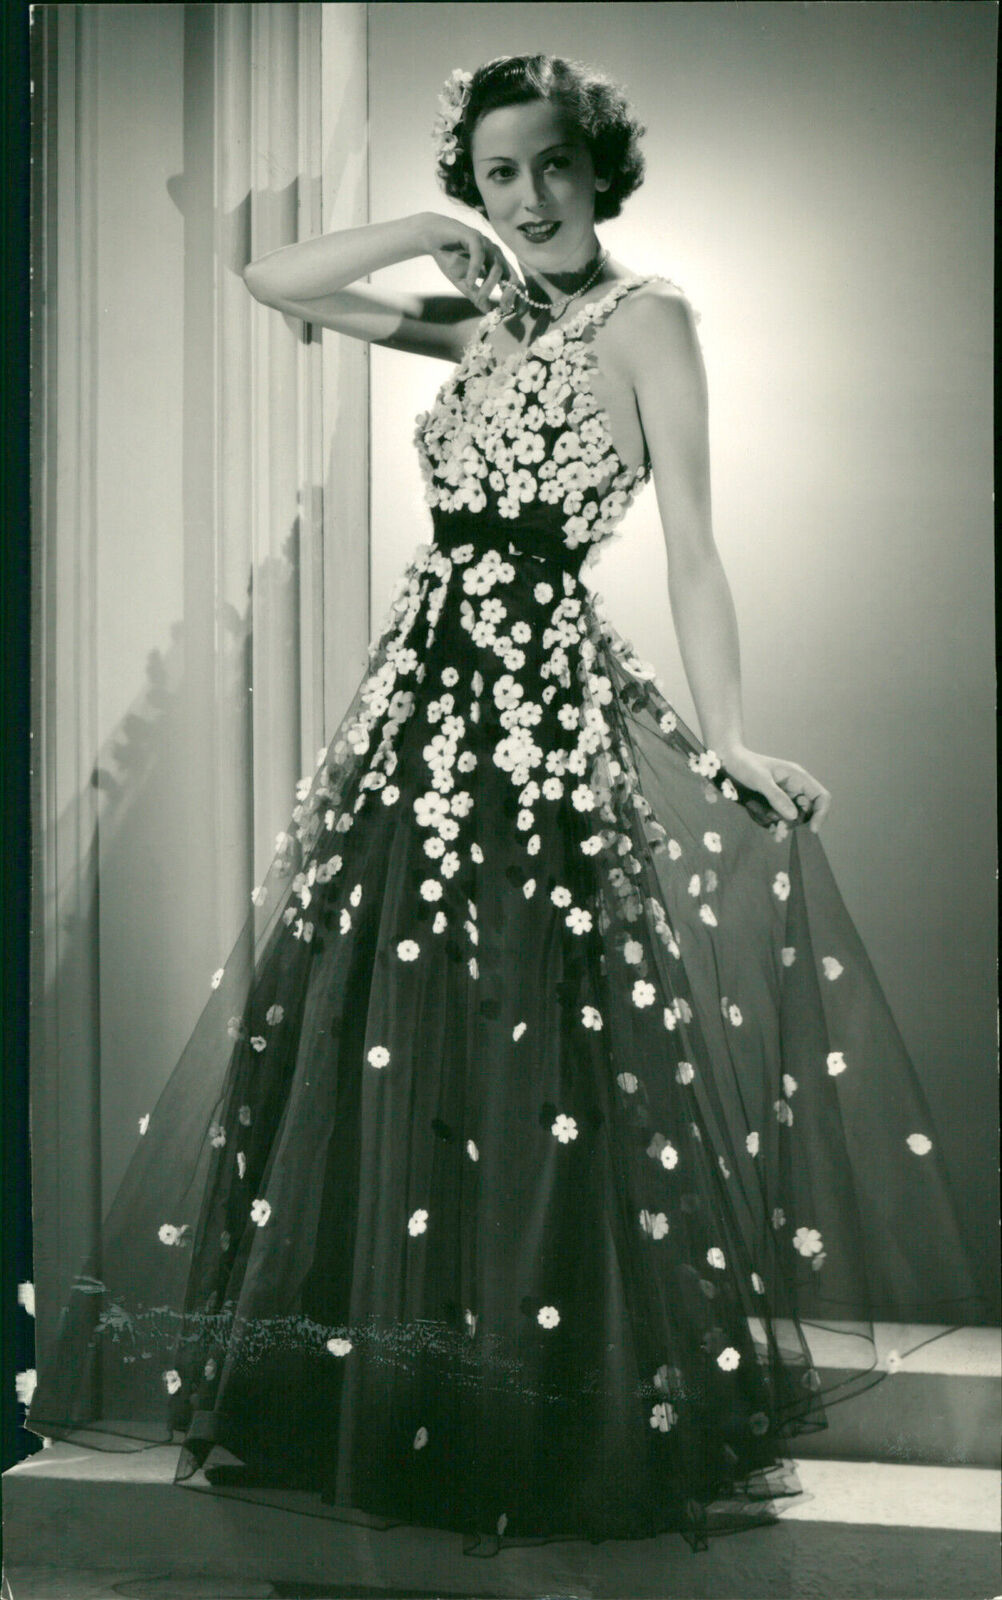 Long evening dress with flowers - Vintage Photograph 2598799